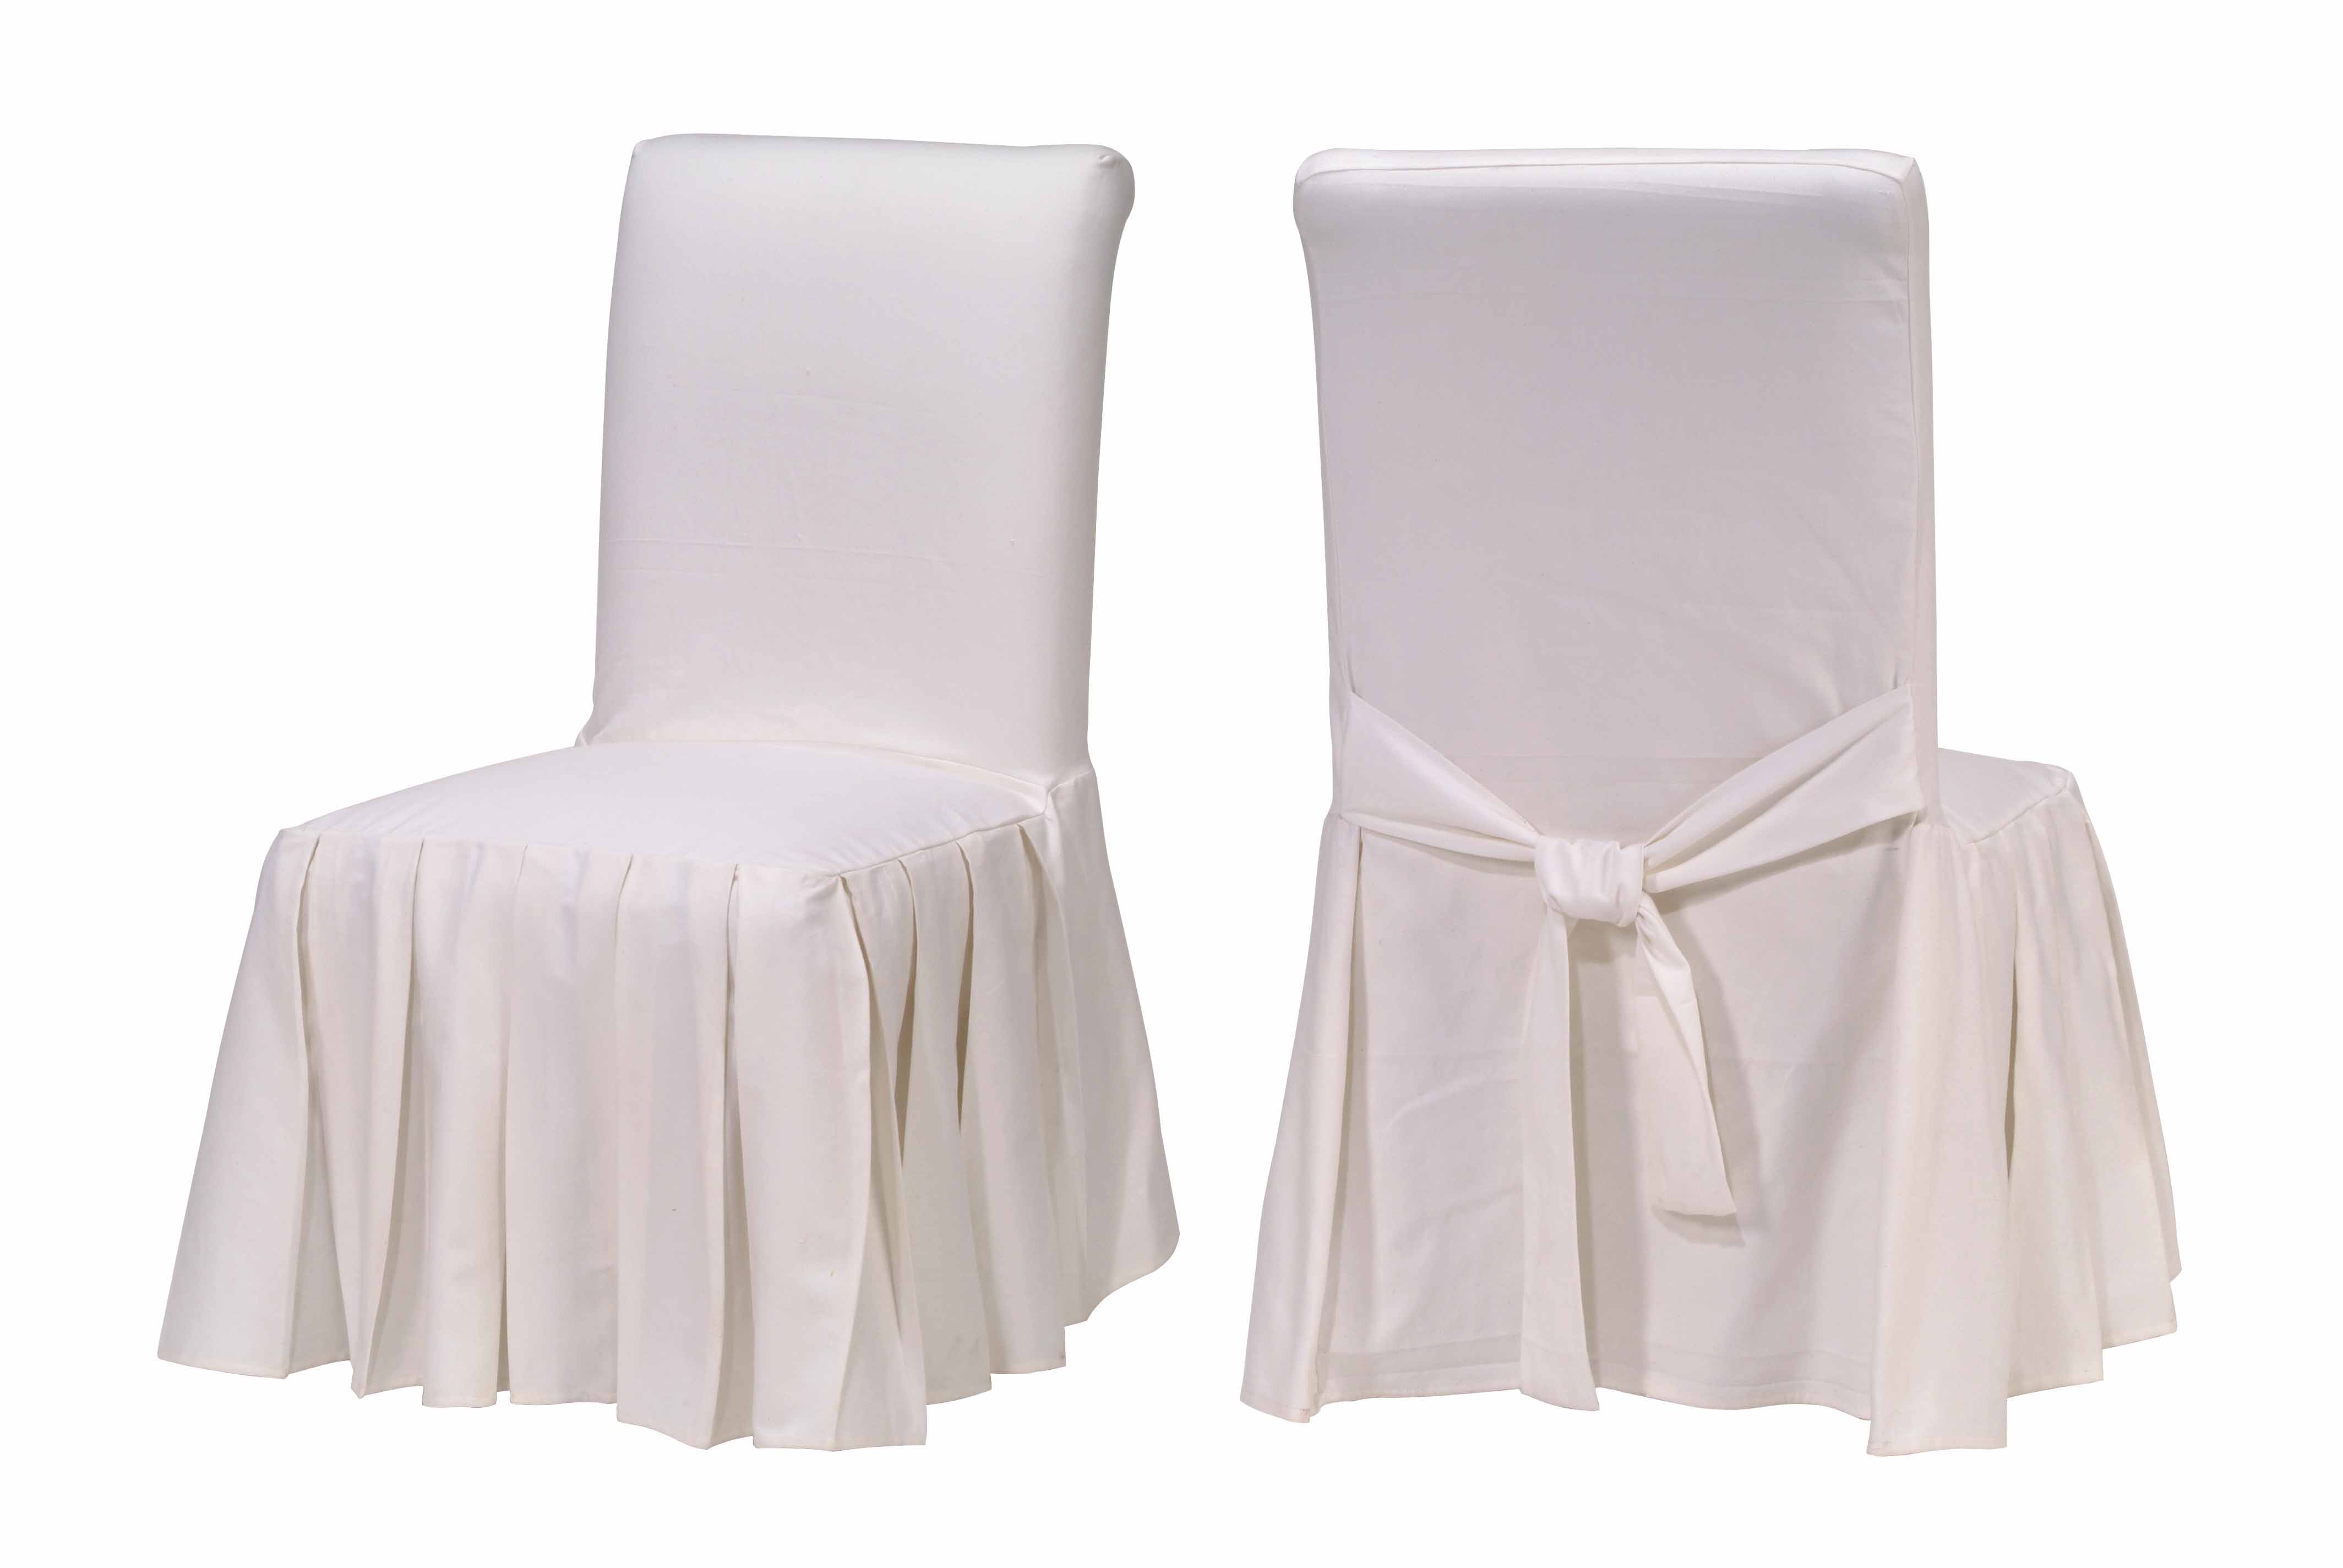 dining room chair covers johannesburg